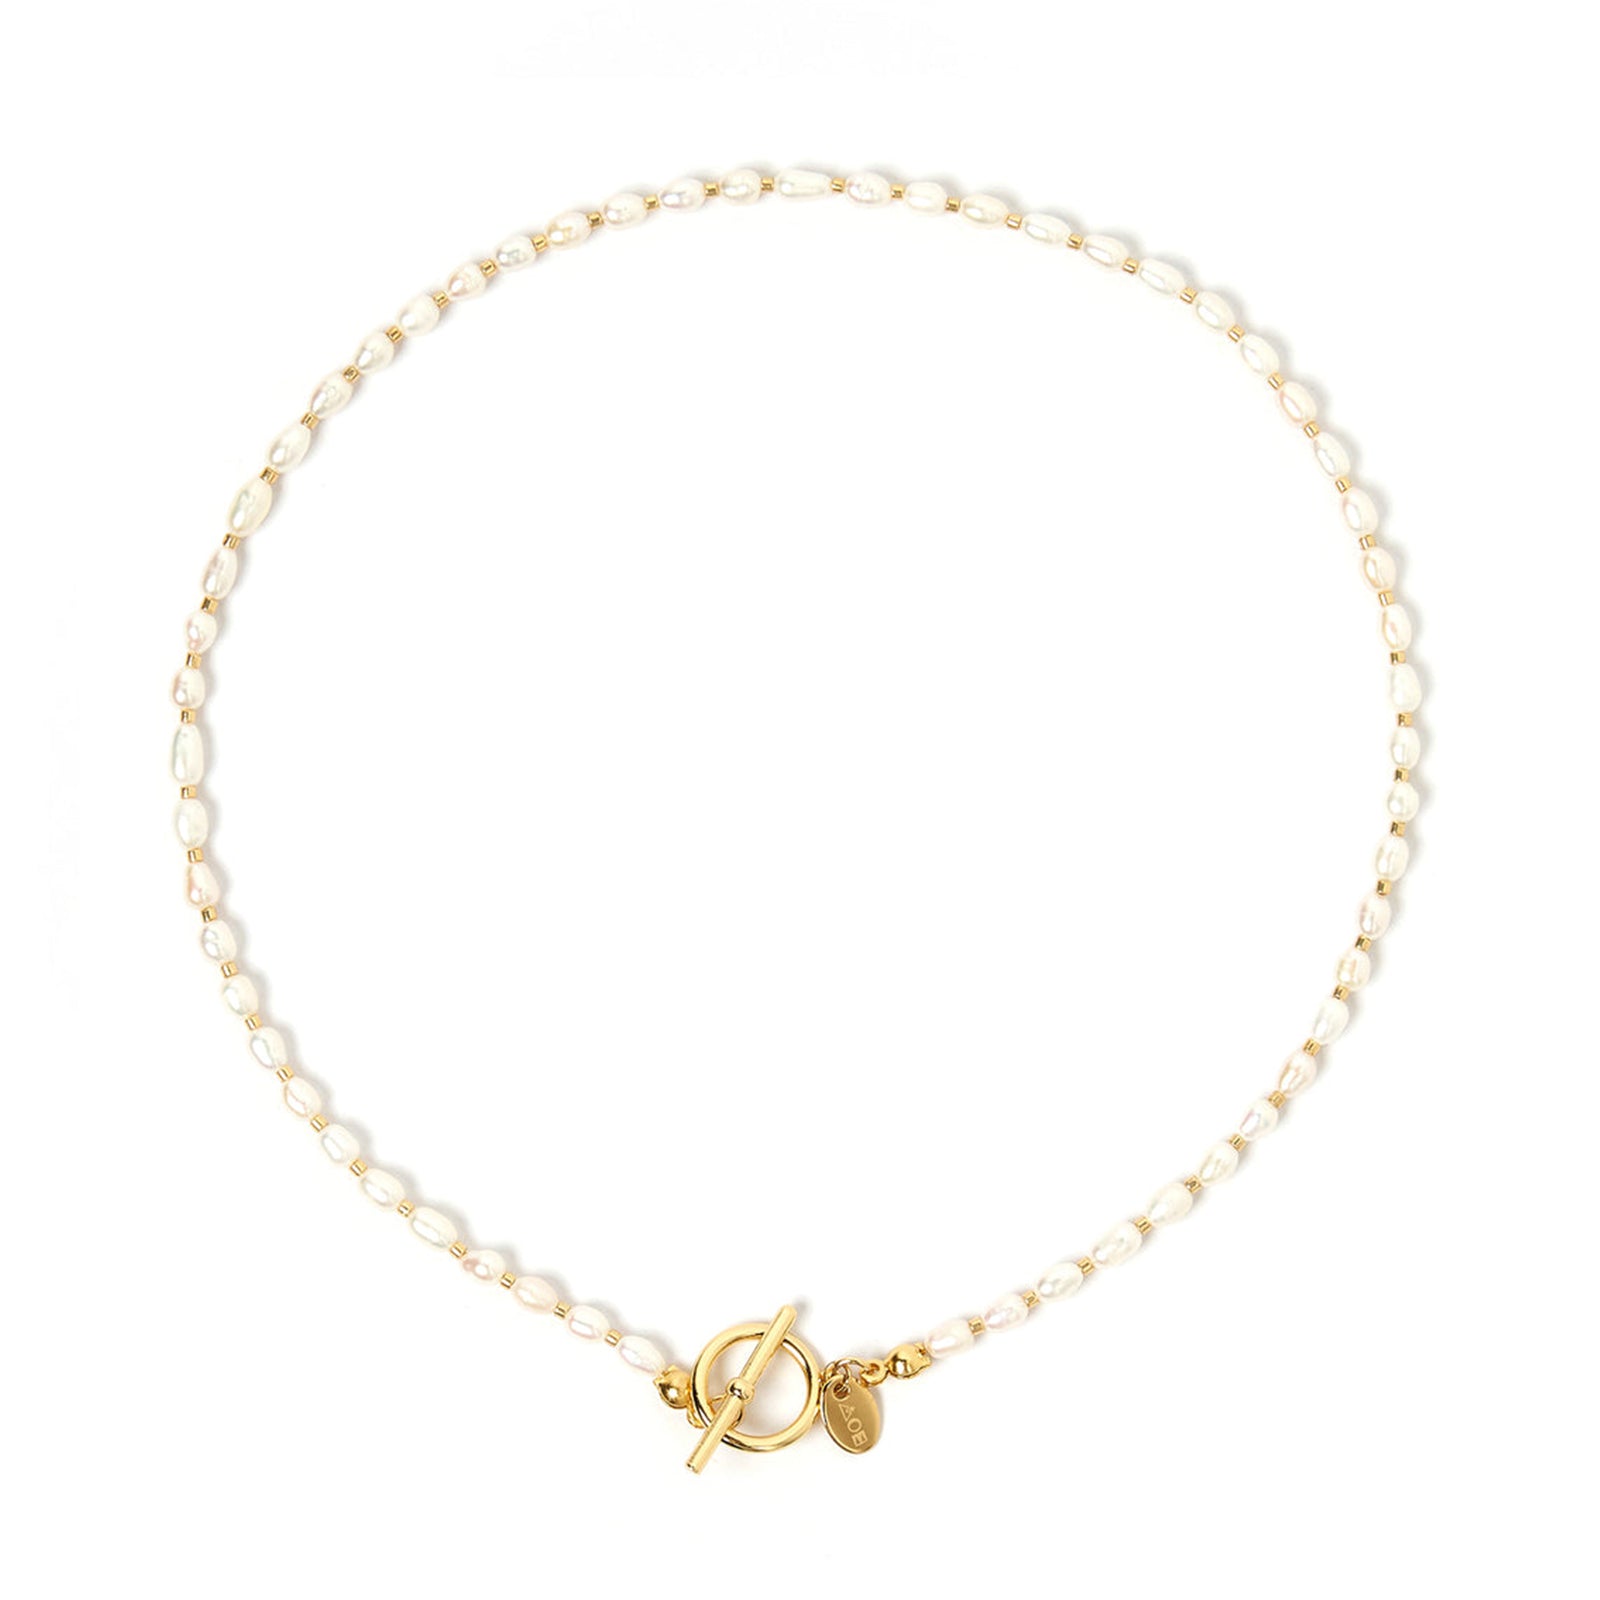 Arms Of Eve elegant Bahamas pearl and gold necklace with various clasps and bead styles